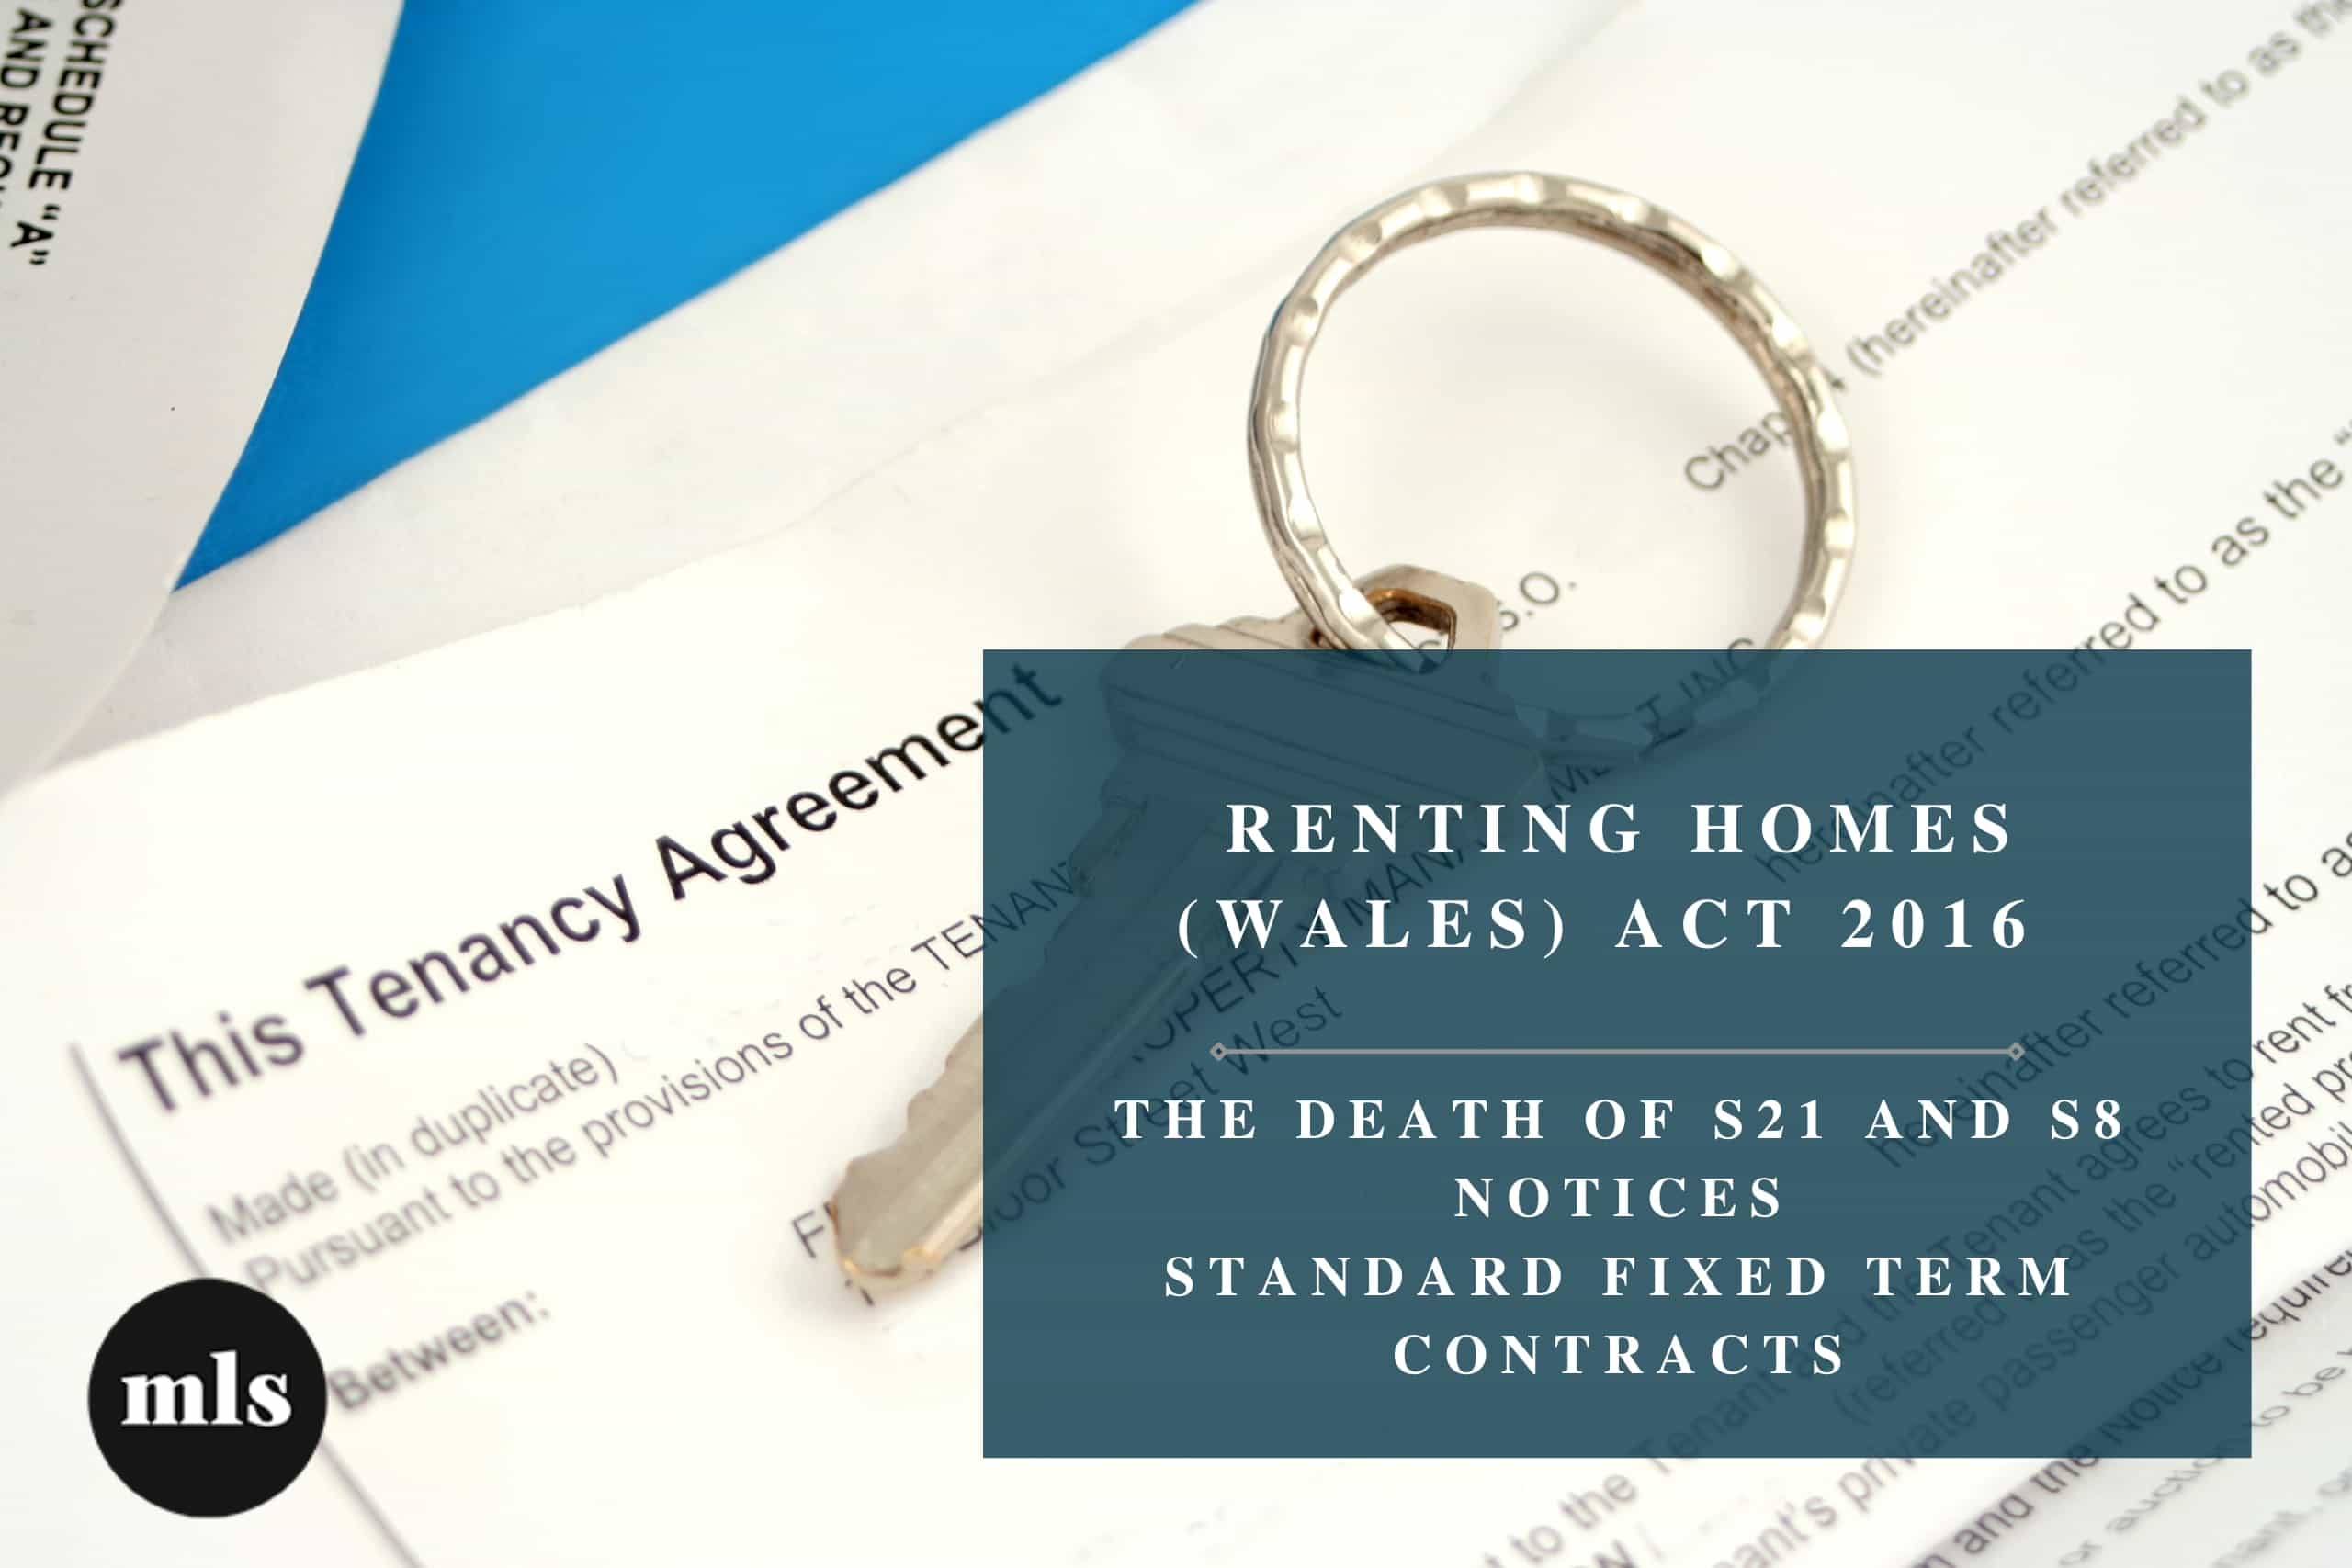 RENTING HOMES (WALES) ACT 2016 – The death of s21 and s8 notices (contd).